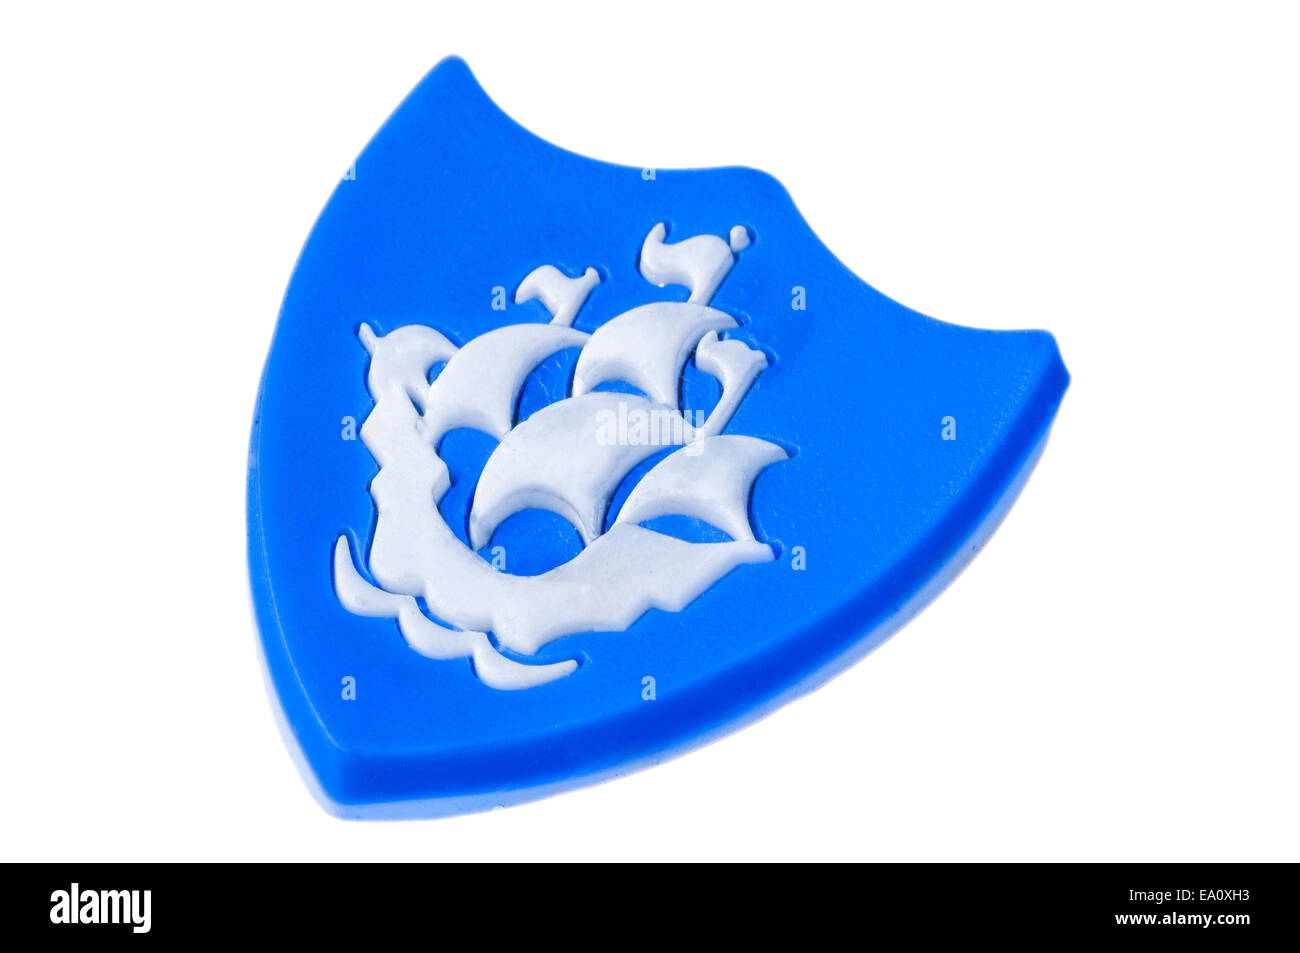 A Blue Peter badge Stock Photo